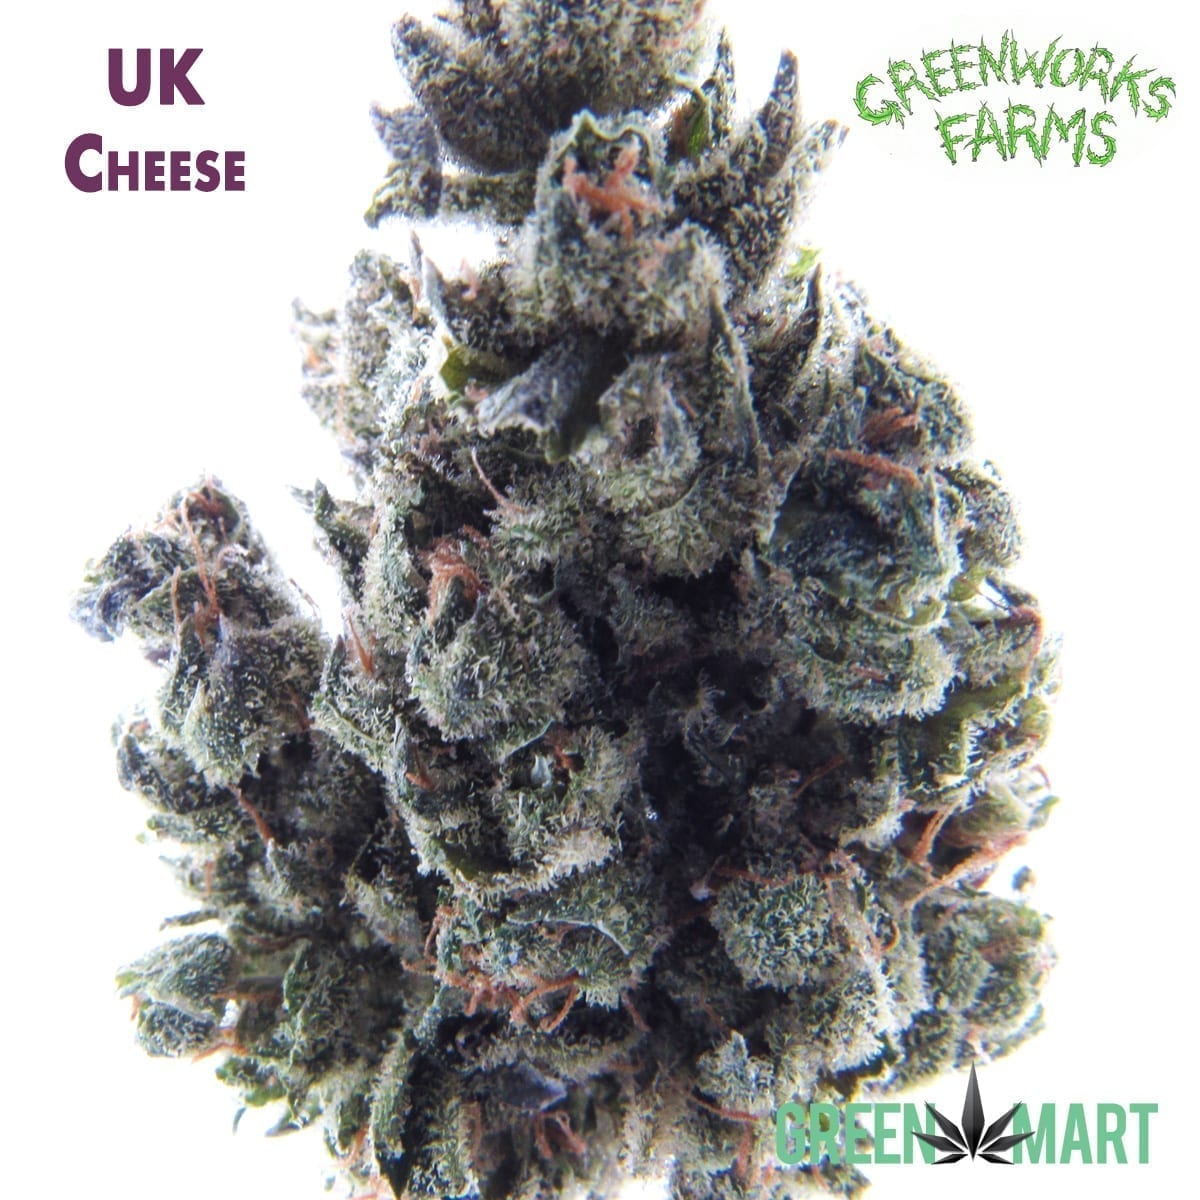 UK Cheese by Greenworks Farms